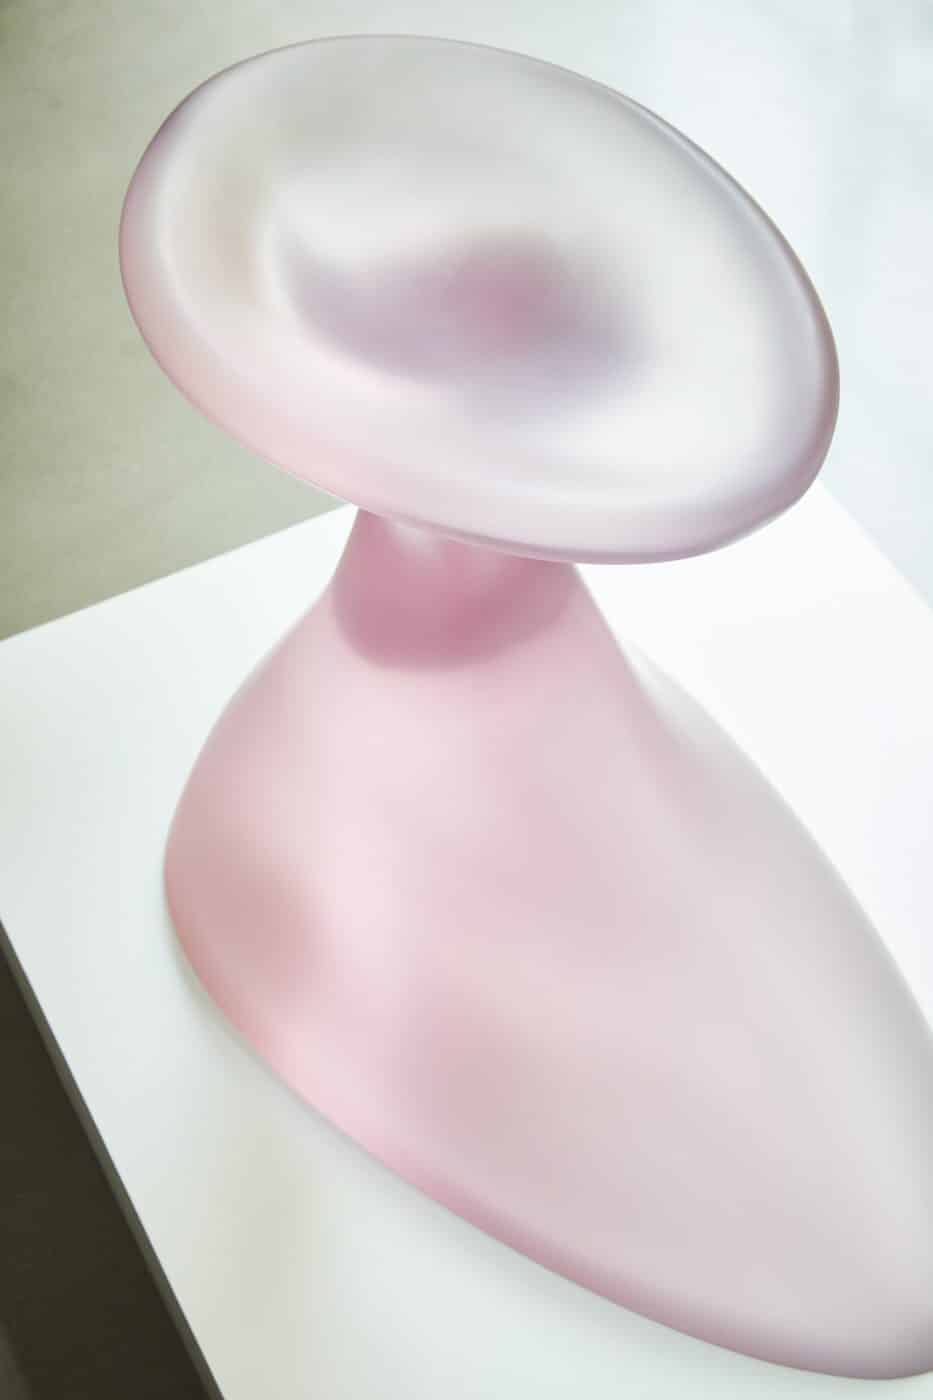 A pale pink translucent silicon birdbath by Paula Hayes with a smooth amorphous form